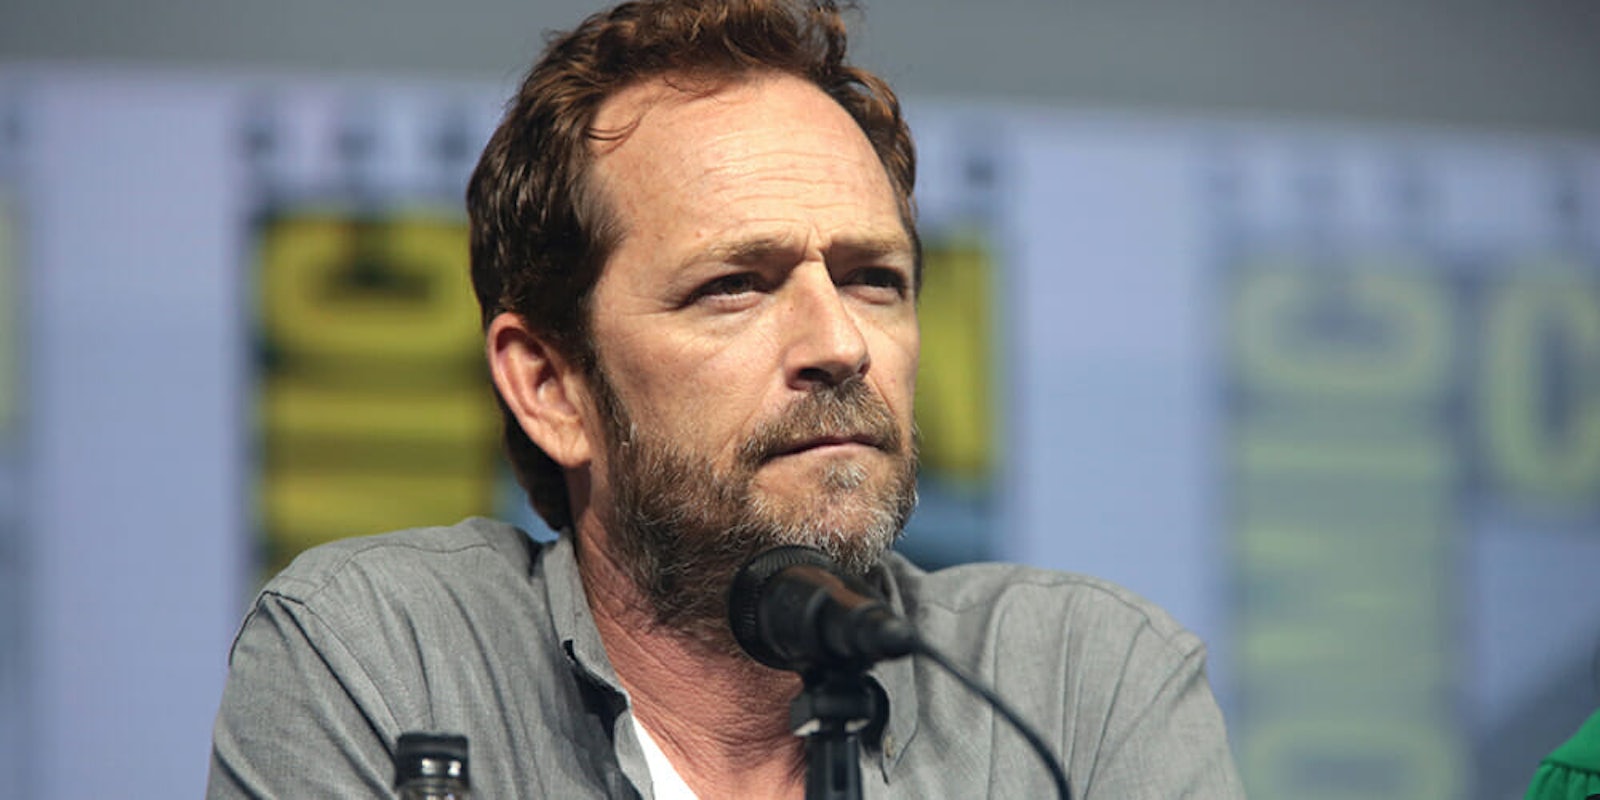 Luke Perry has died at 52.